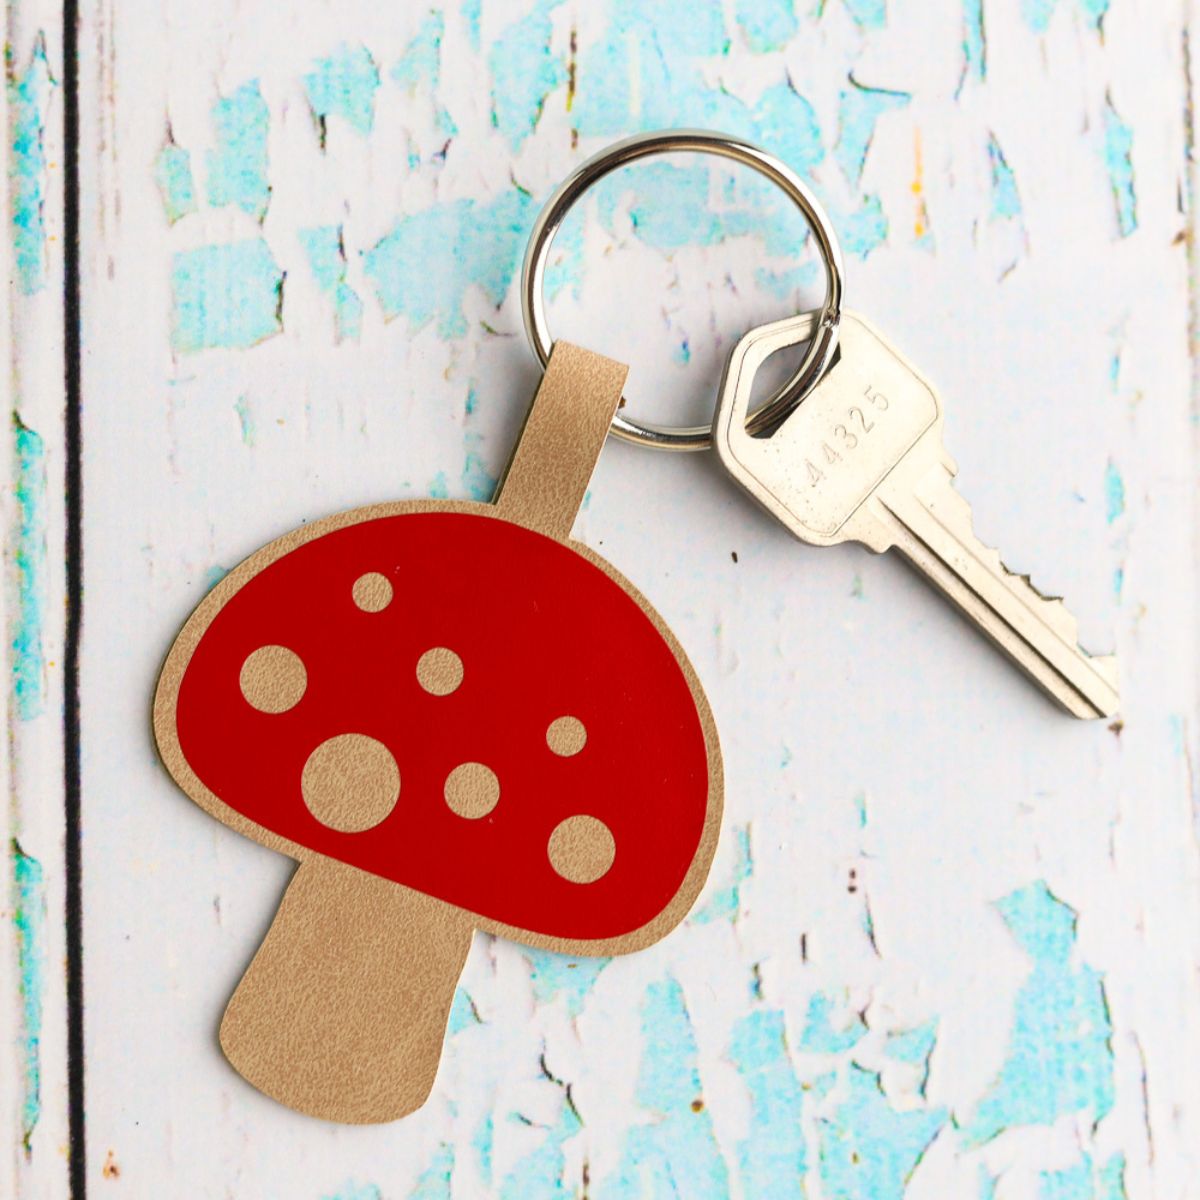 How to Make a DIY Faux Leather Keychain